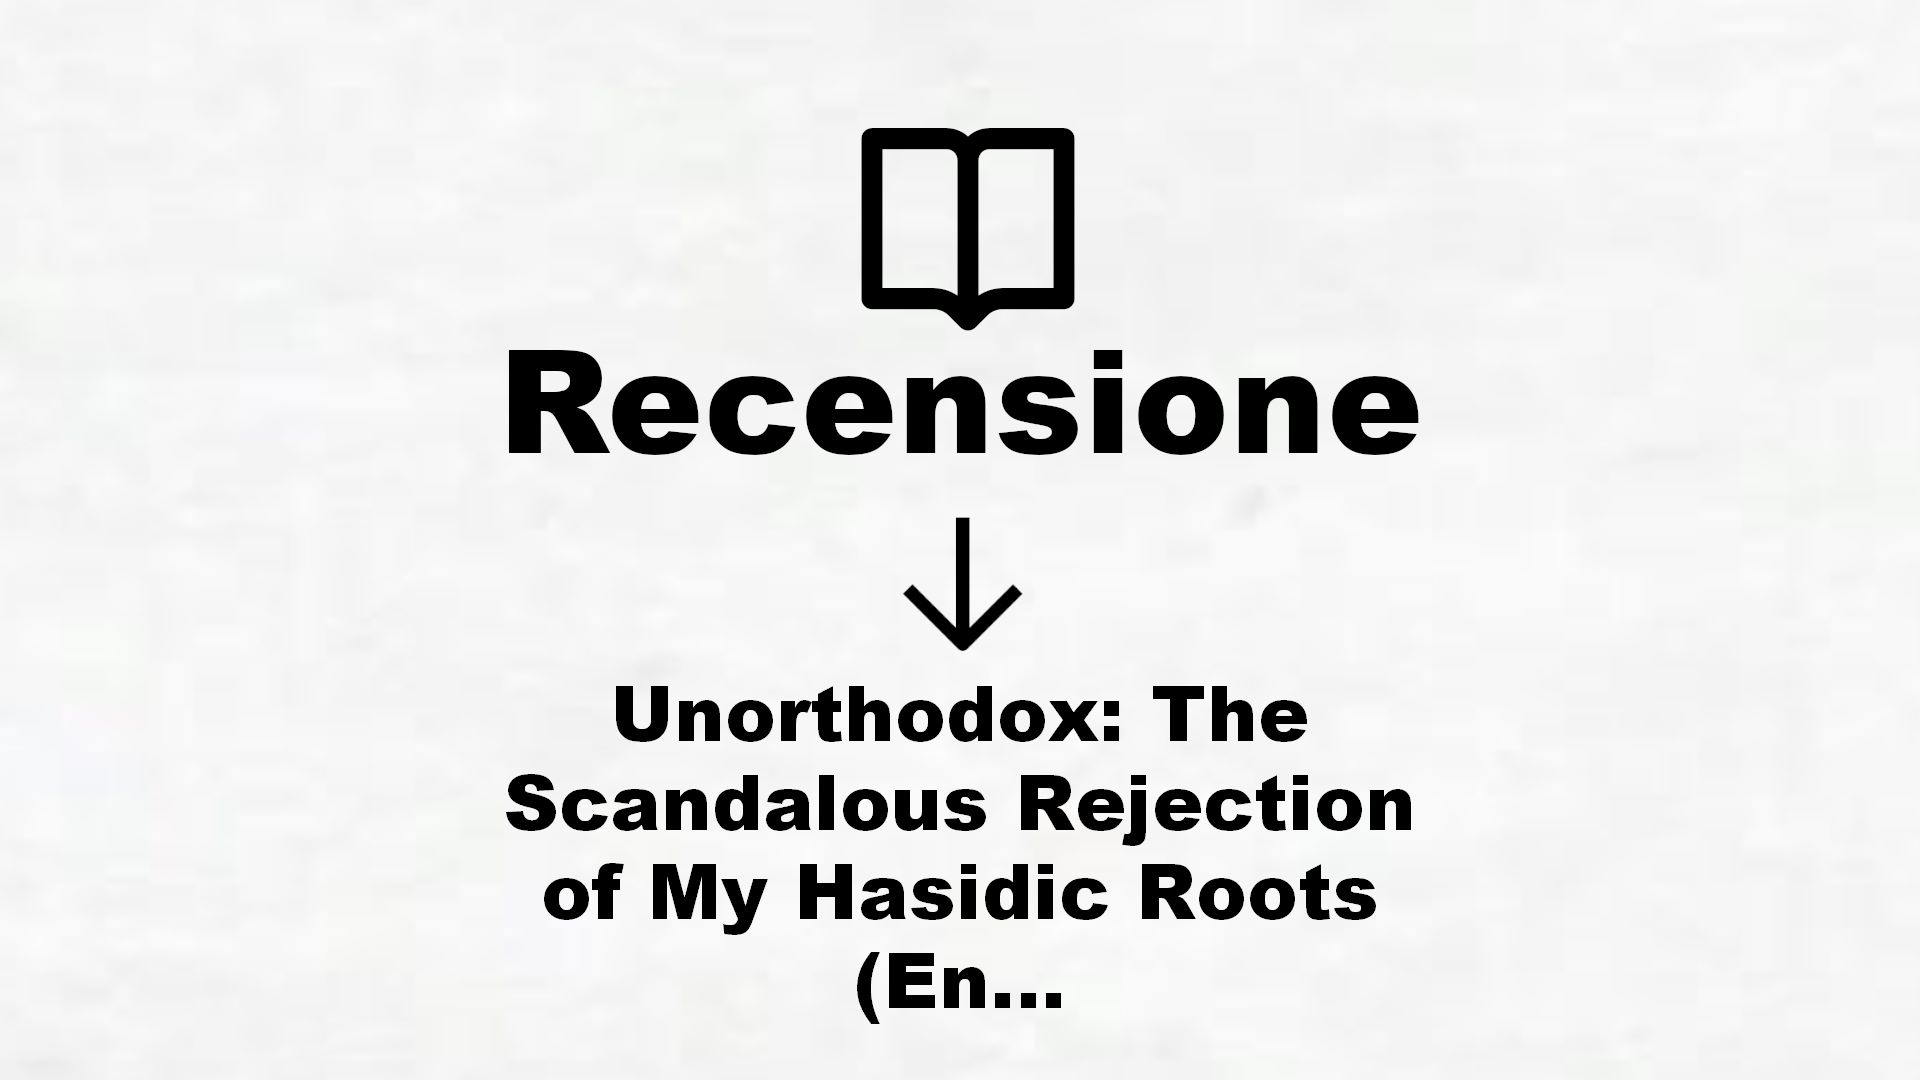 Unorthodox: The Scandalous Rejection of My Hasidic Roots (English Edition) – Recensione Libro